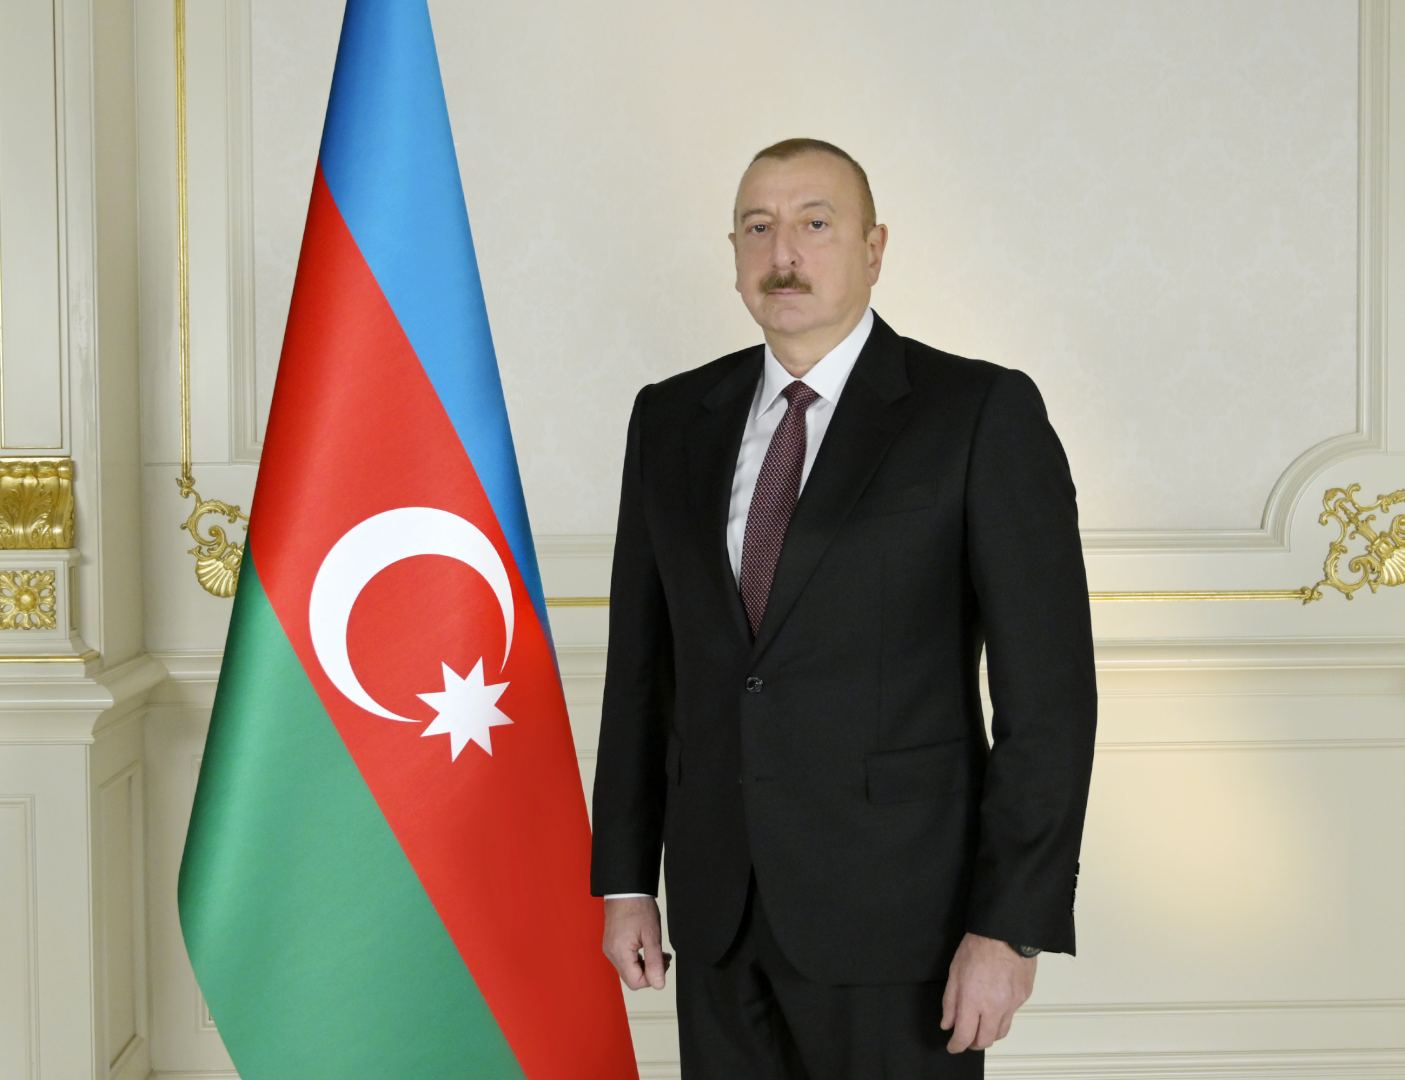 President Aliyev: Biggest contribution to new geopolitical reality was signing Shusha Declaration